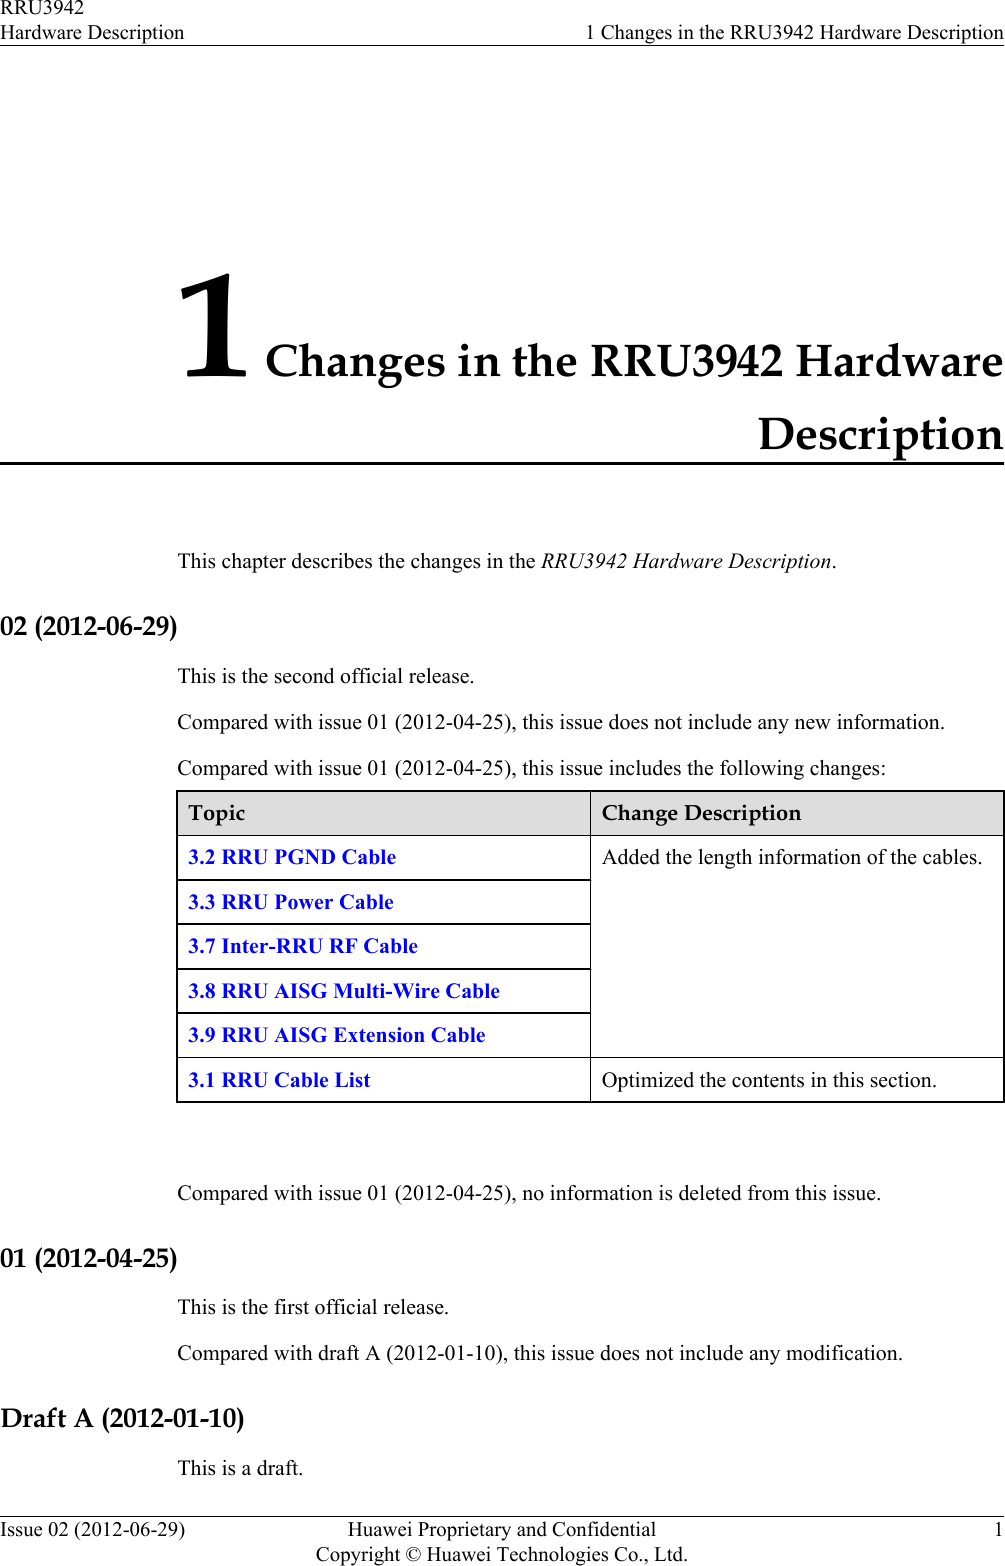 1 Changes in the RRU3942 HardwareDescriptionThis chapter describes the changes in the RRU3942 Hardware Description.02 (2012-06-29)This is the second official release.Compared with issue 01 (2012-04-25), this issue does not include any new information.Compared with issue 01 (2012-04-25), this issue includes the following changes:Topic Change Description3.2 RRU PGND Cable Added the length information of the cables.3.3 RRU Power Cable3.7 Inter-RRU RF Cable3.8 RRU AISG Multi-Wire Cable3.9 RRU AISG Extension Cable3.1 RRU Cable List Optimized the contents in this section. Compared with issue 01 (2012-04-25), no information is deleted from this issue.01 (2012-04-25)This is the first official release.Compared with draft A (2012-01-10), this issue does not include any modification.Draft A (2012-01-10)This is a draft.RRU3942Hardware Description 1 Changes in the RRU3942 Hardware DescriptionIssue 02 (2012-06-29) Huawei Proprietary and ConfidentialCopyright © Huawei Technologies Co., Ltd.1